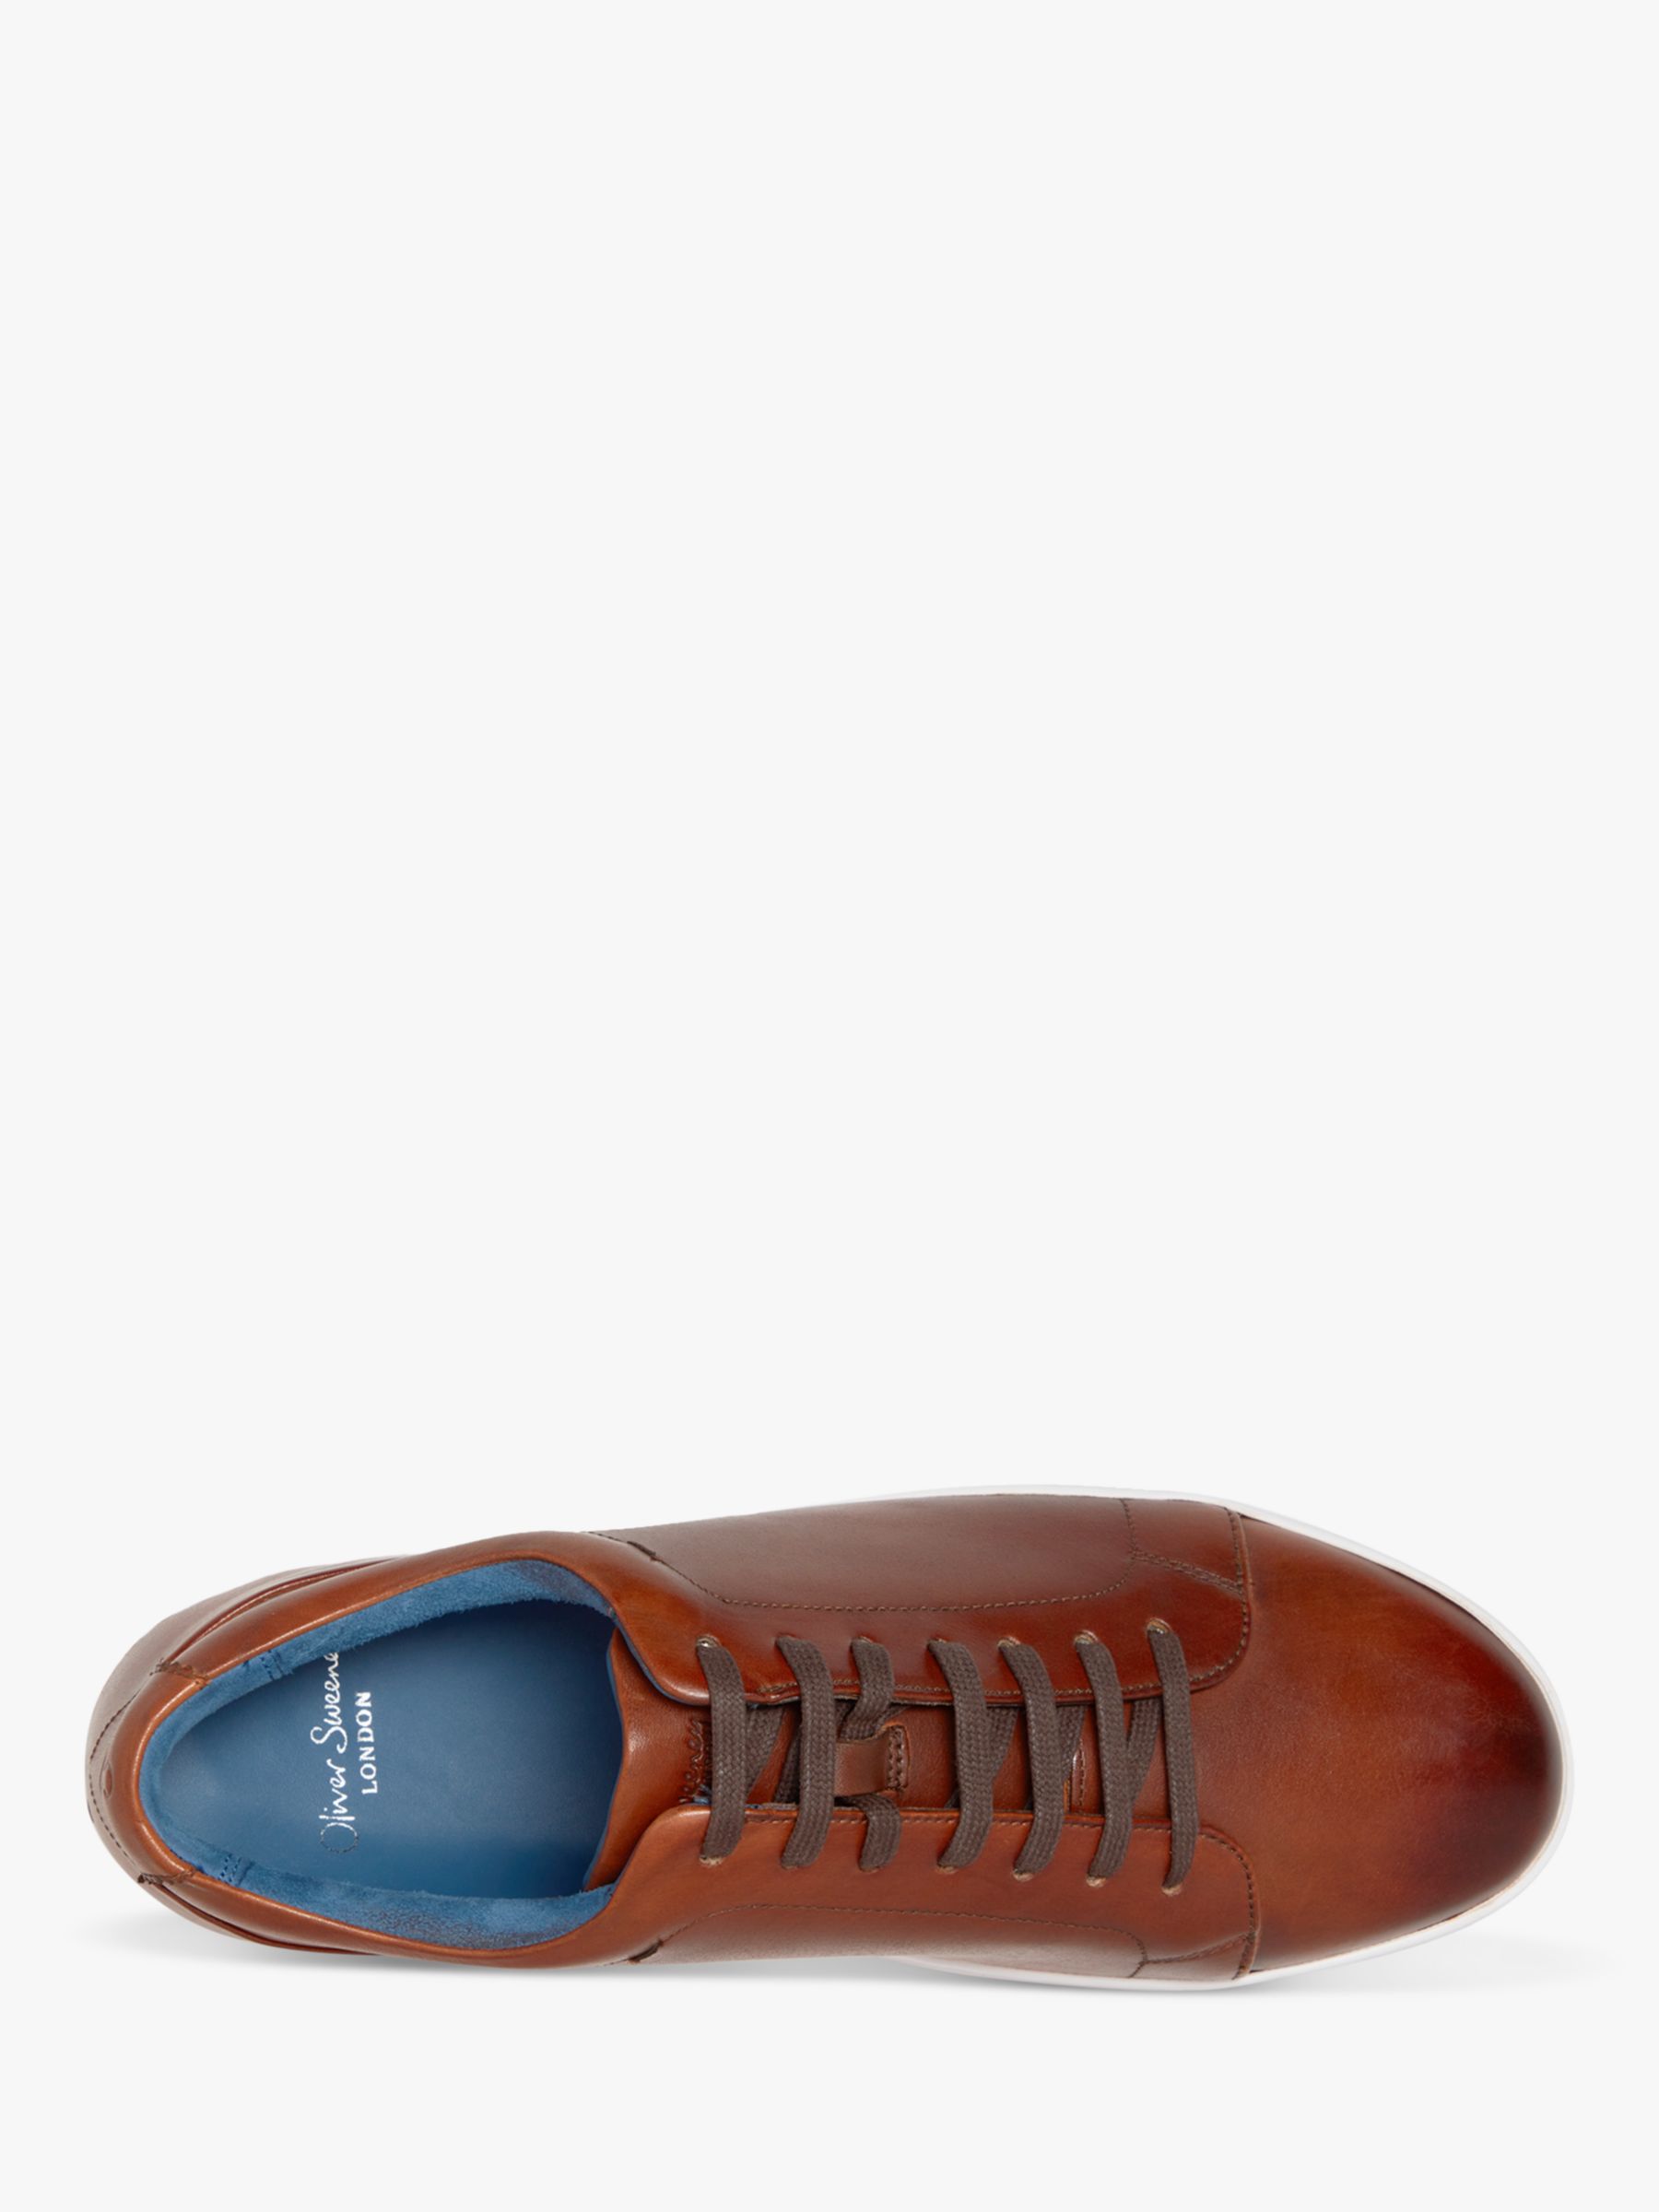 Oliver Sweeney Hayle Leather Trainers, Cognac, 7